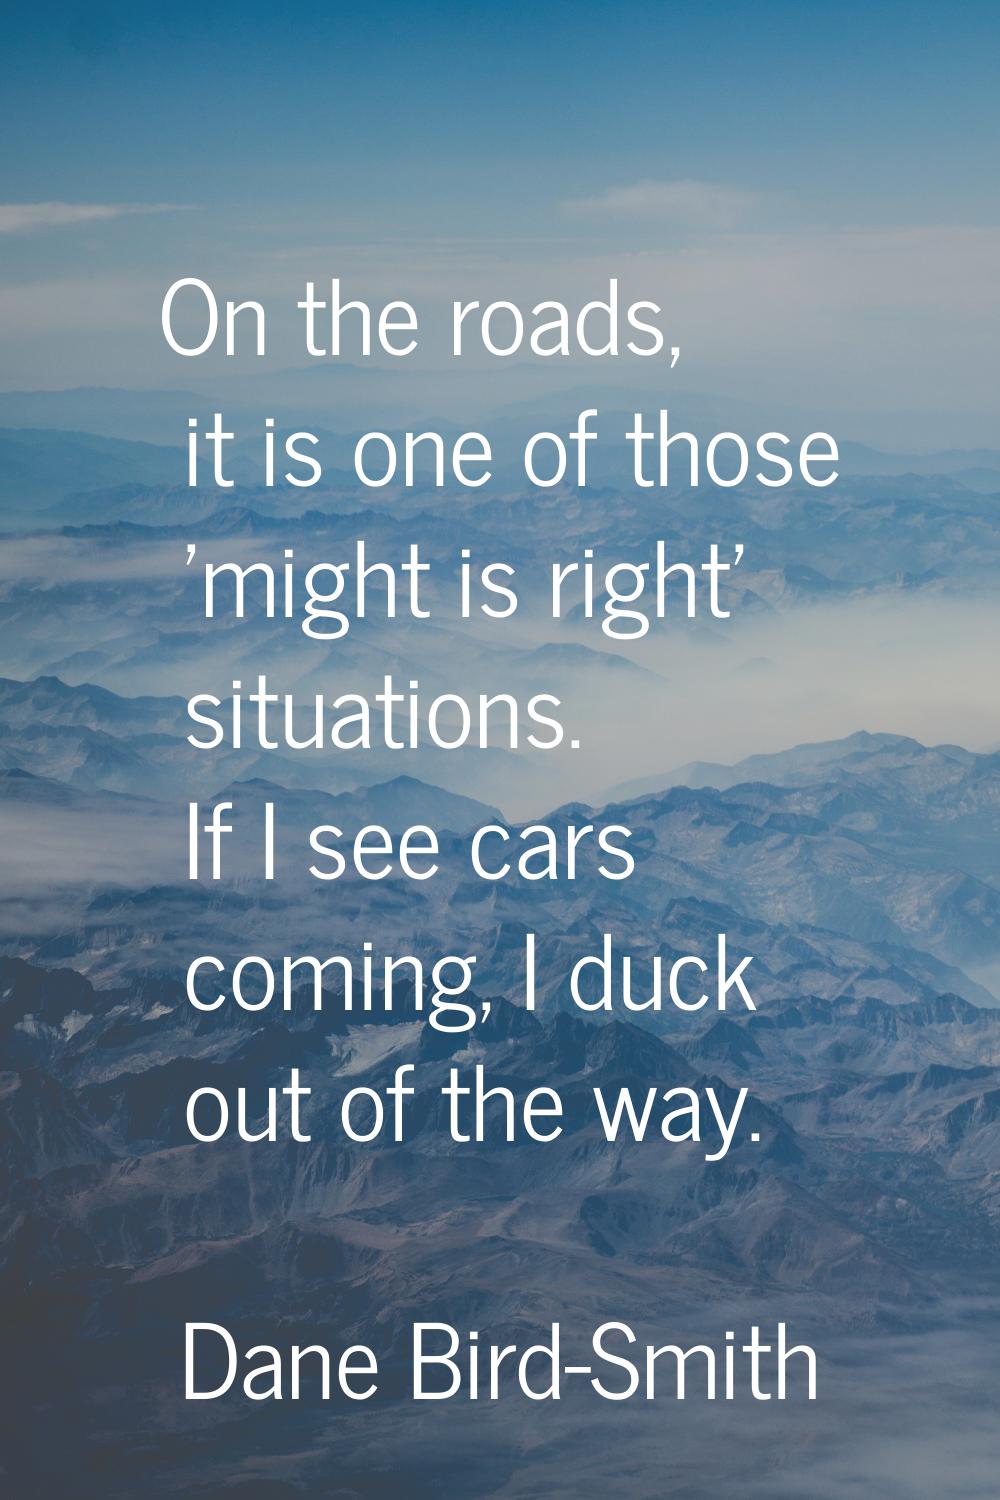 On the roads, it is one of those 'might is right' situations. If I see cars coming, I duck out of t